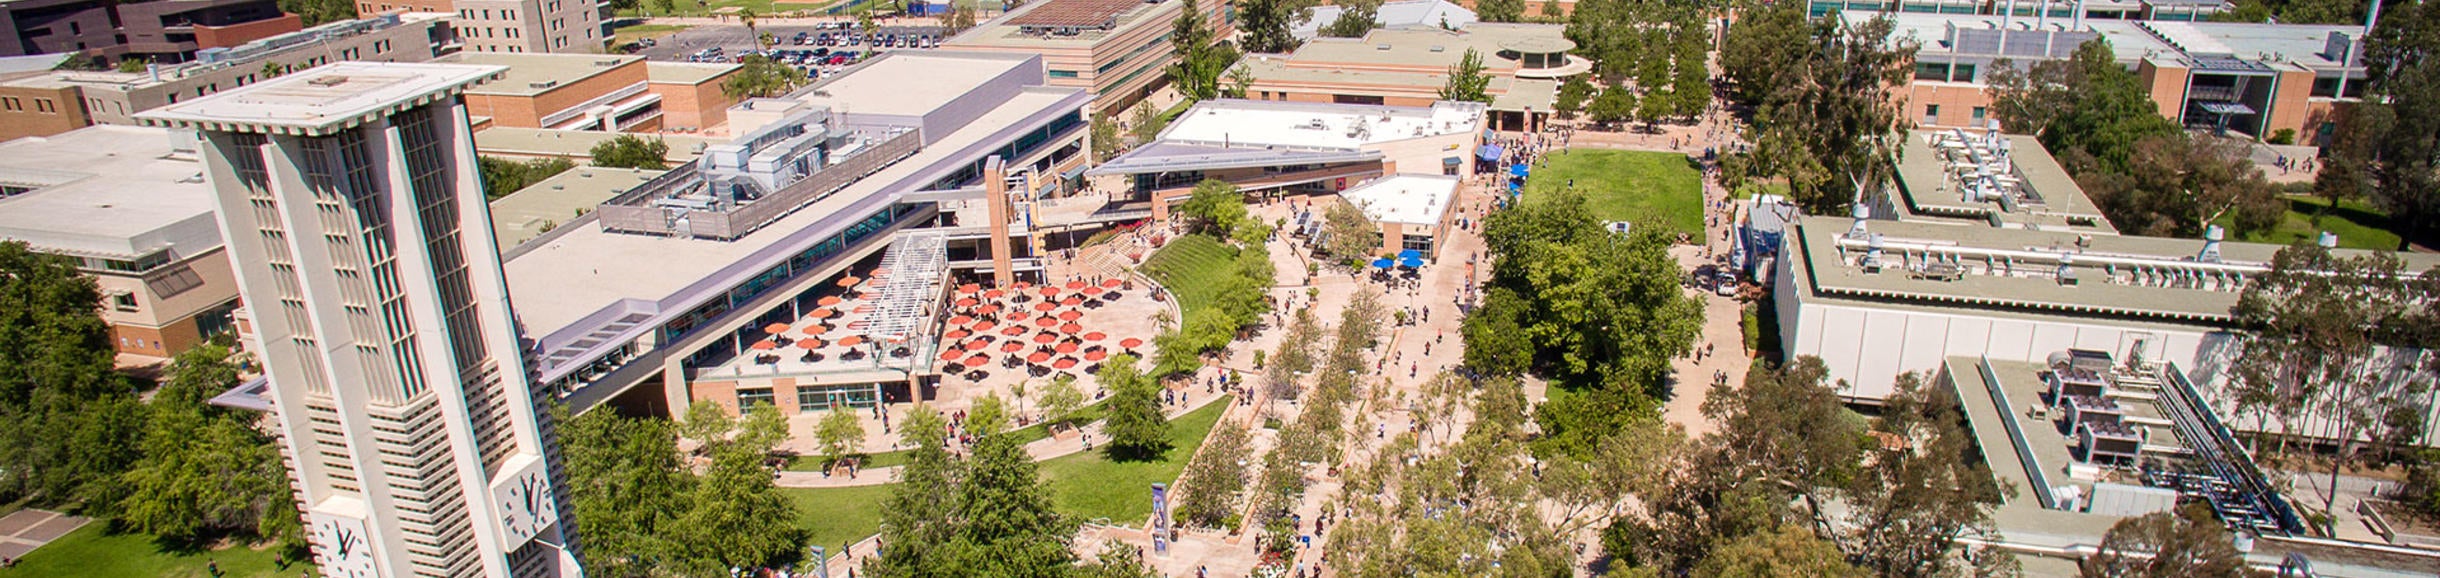 UCR Bell Tower Drone Image